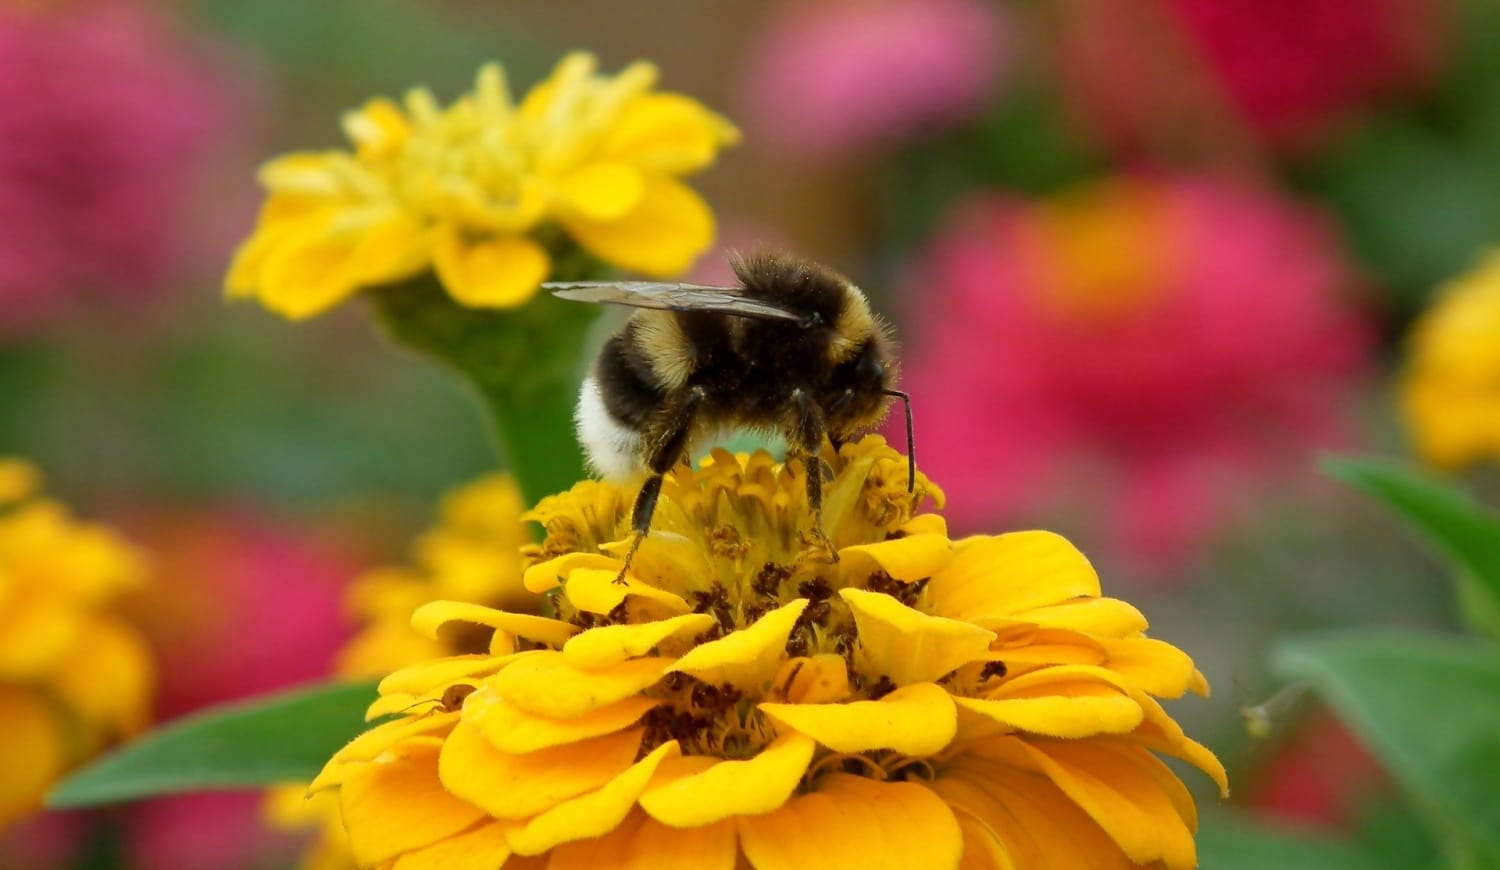 New generation insecticide reduces bumblebee egg laying - British Ecological Society